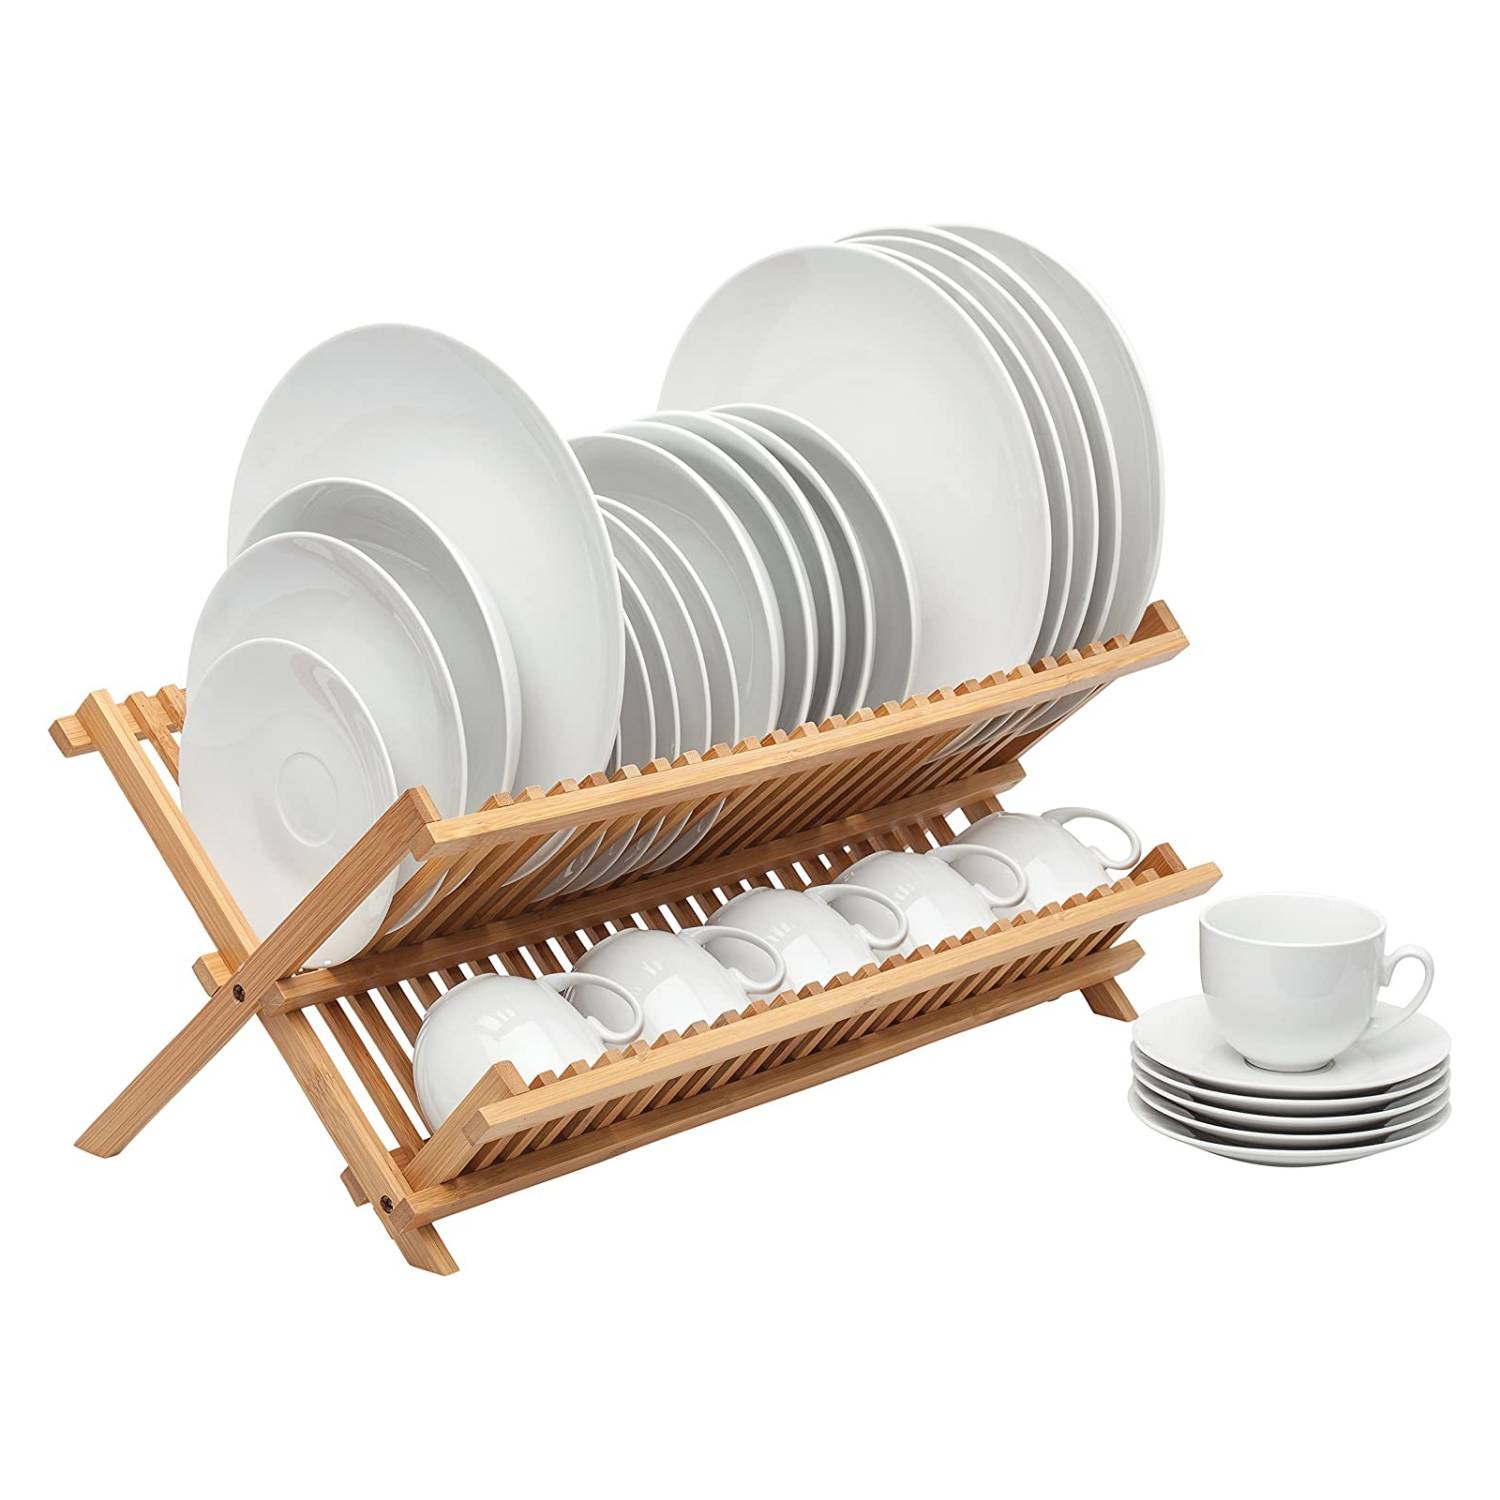 Extra-Large Arch Drying Rack, Dryers and Drying Accessories - Lehman's